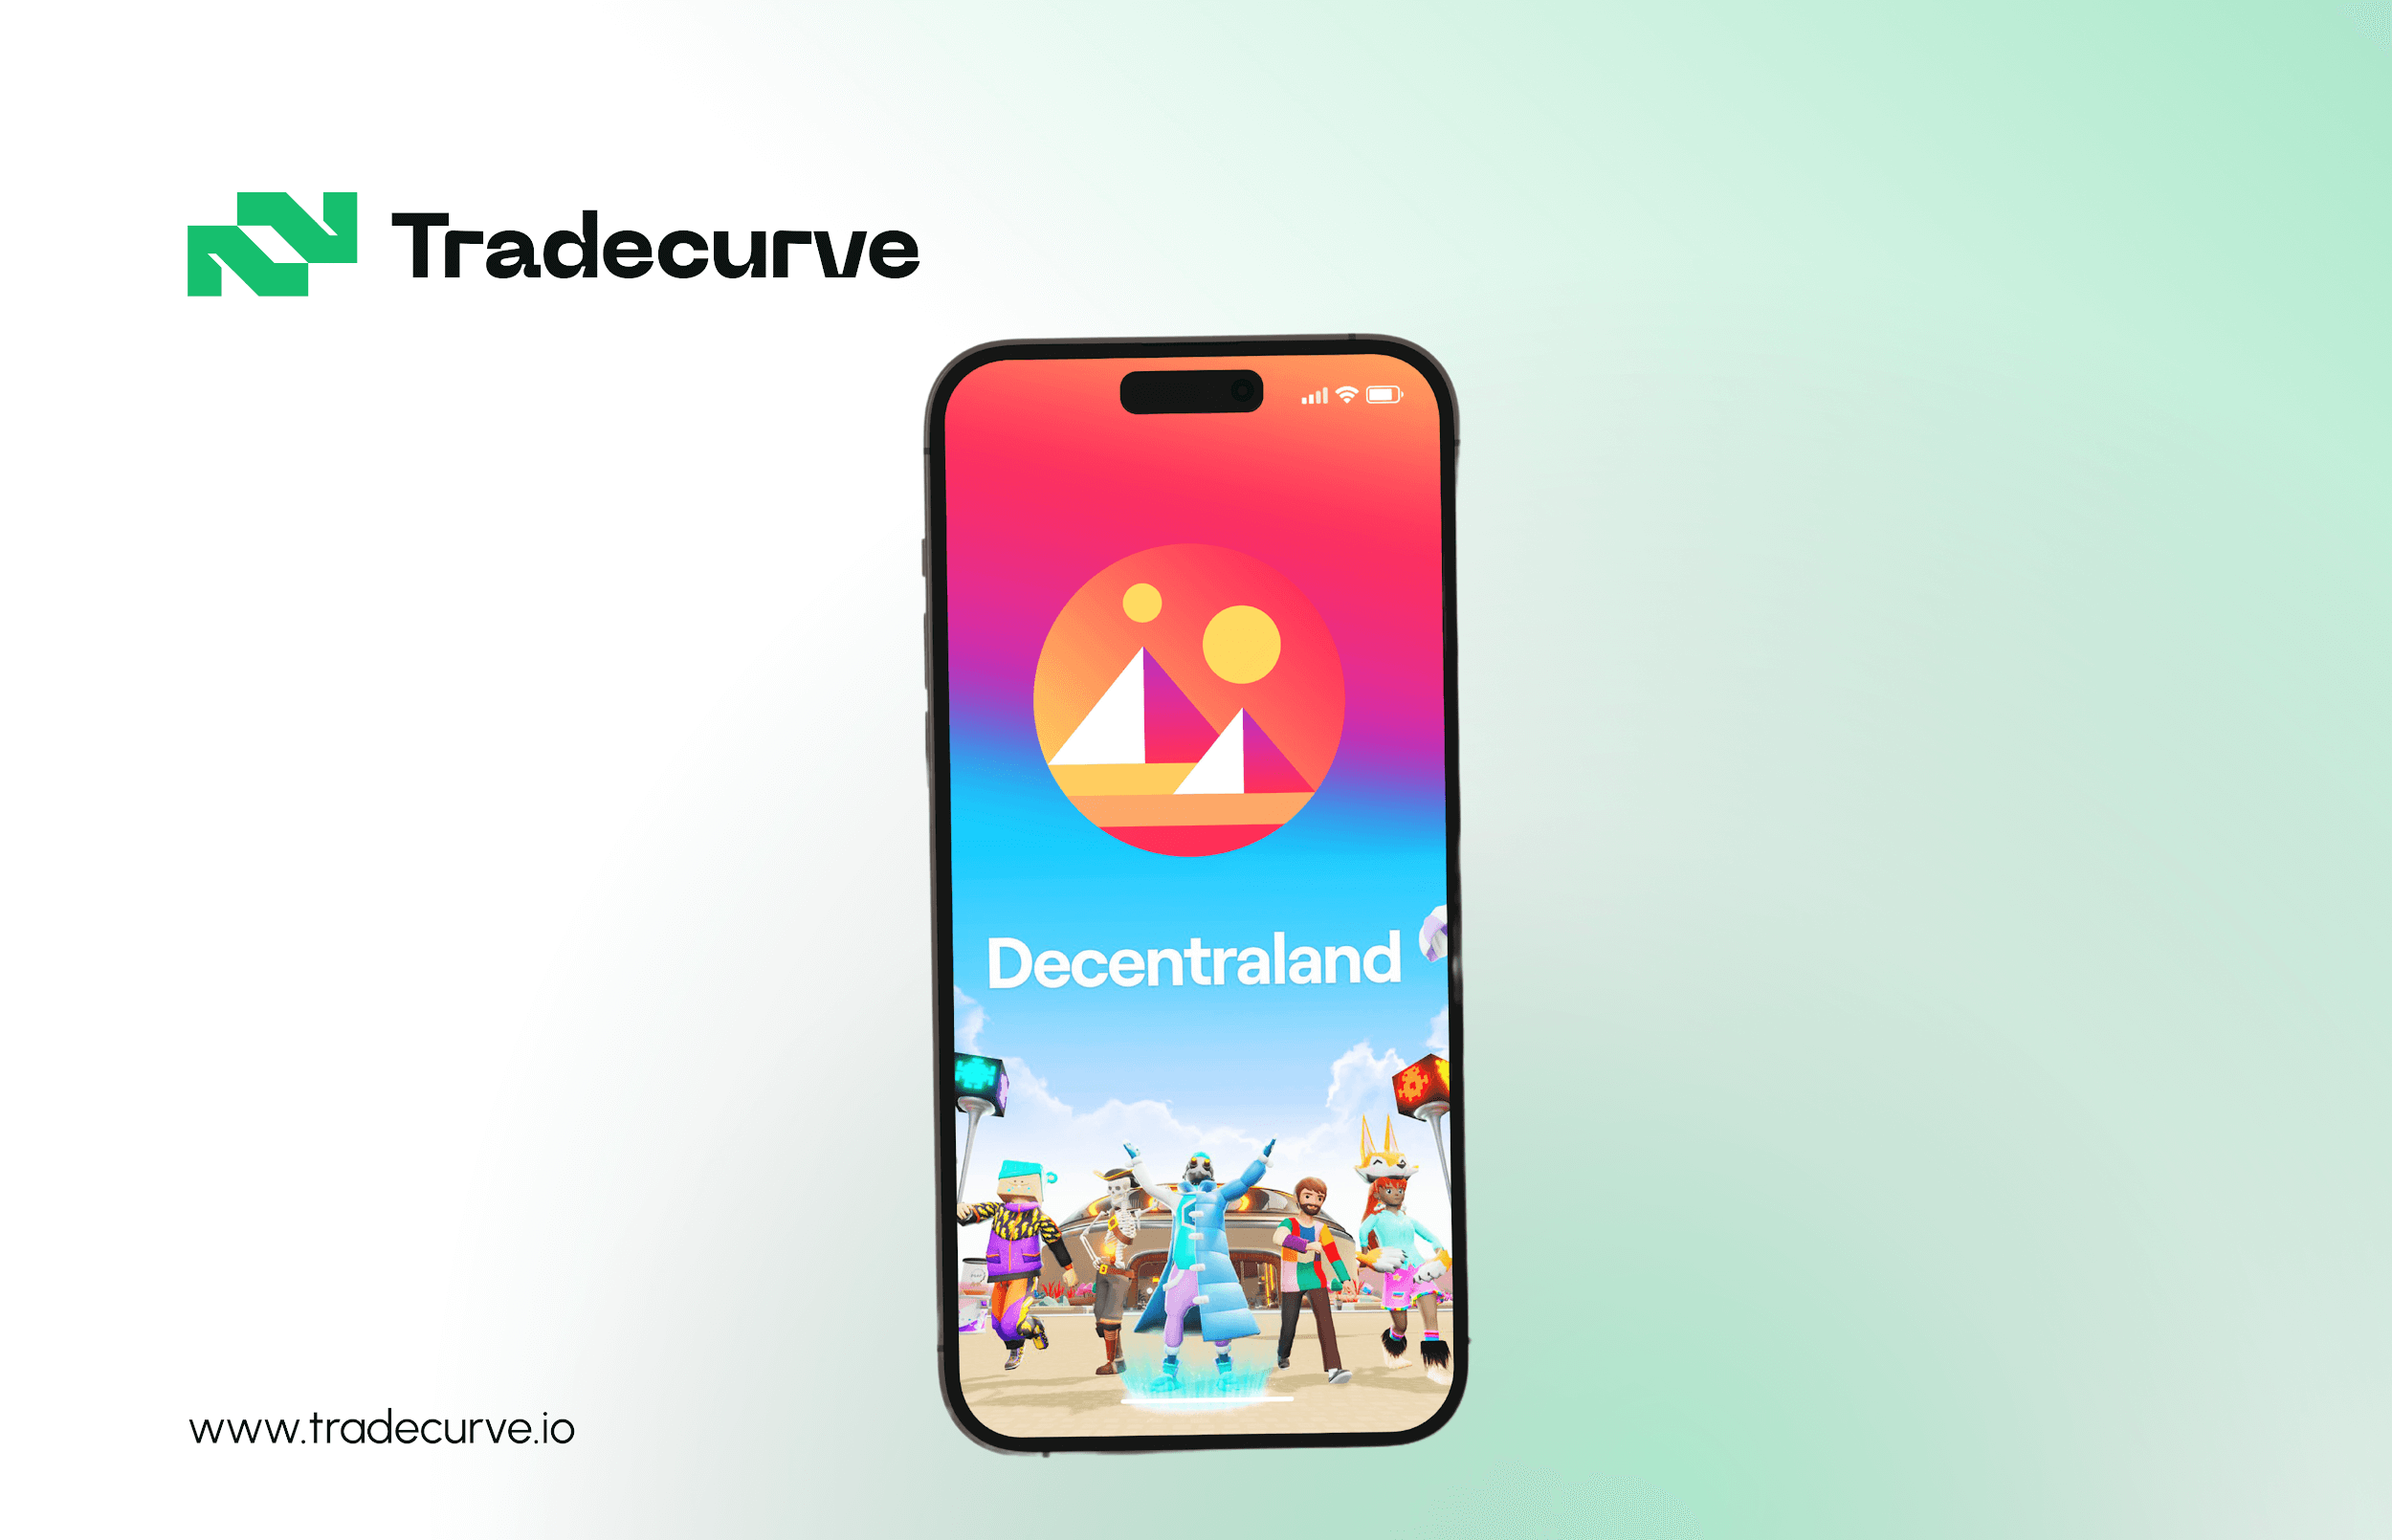 Decentraland shows green on the weekly chart, Tradecurve hits milestone with 13K users